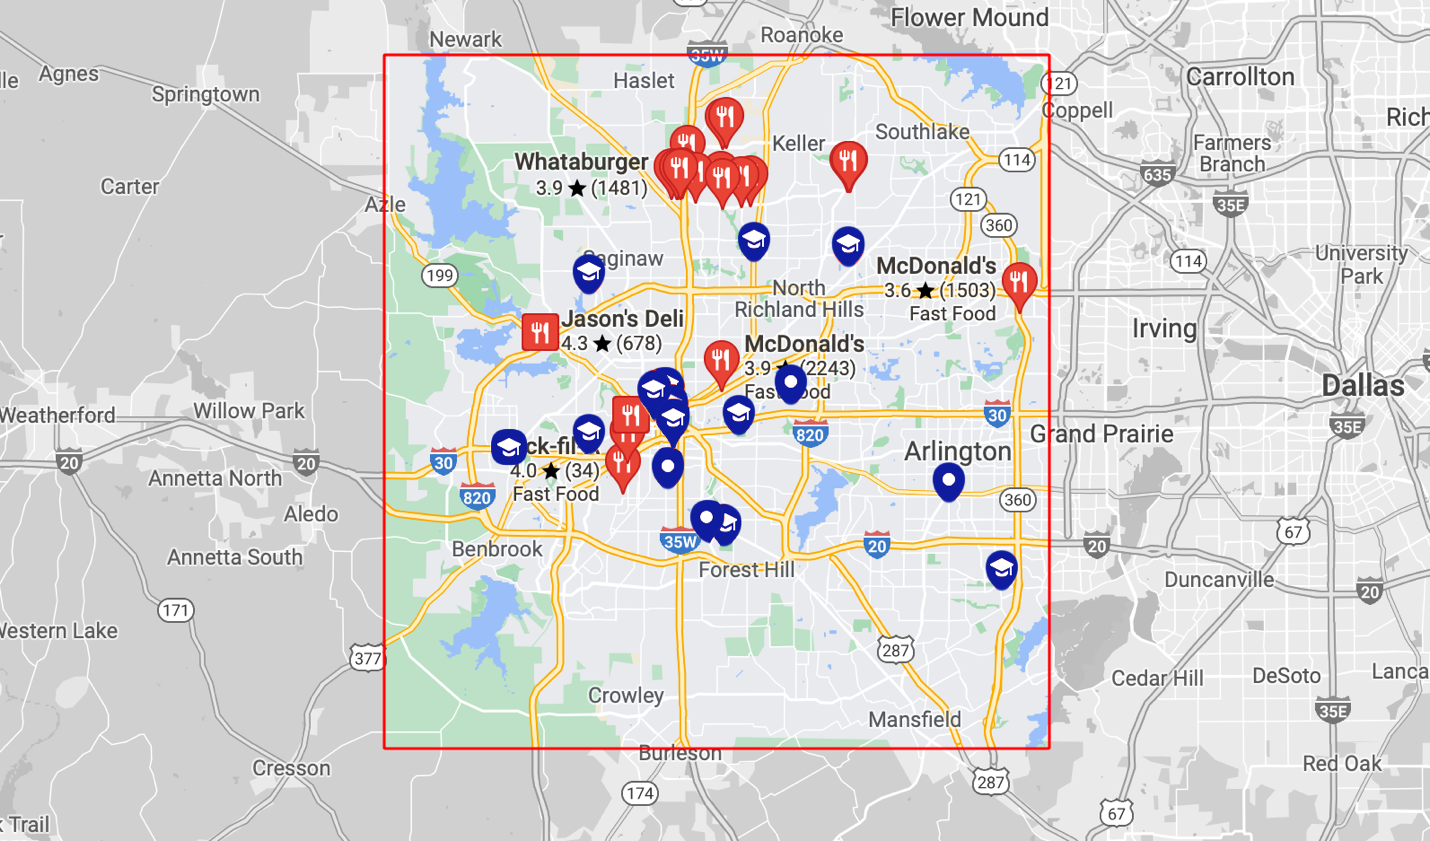 Indications of fast-food places (red flags) and educational institutions (blue flags) on a map of Tarrant County (done independently, data obtained from Google Map)